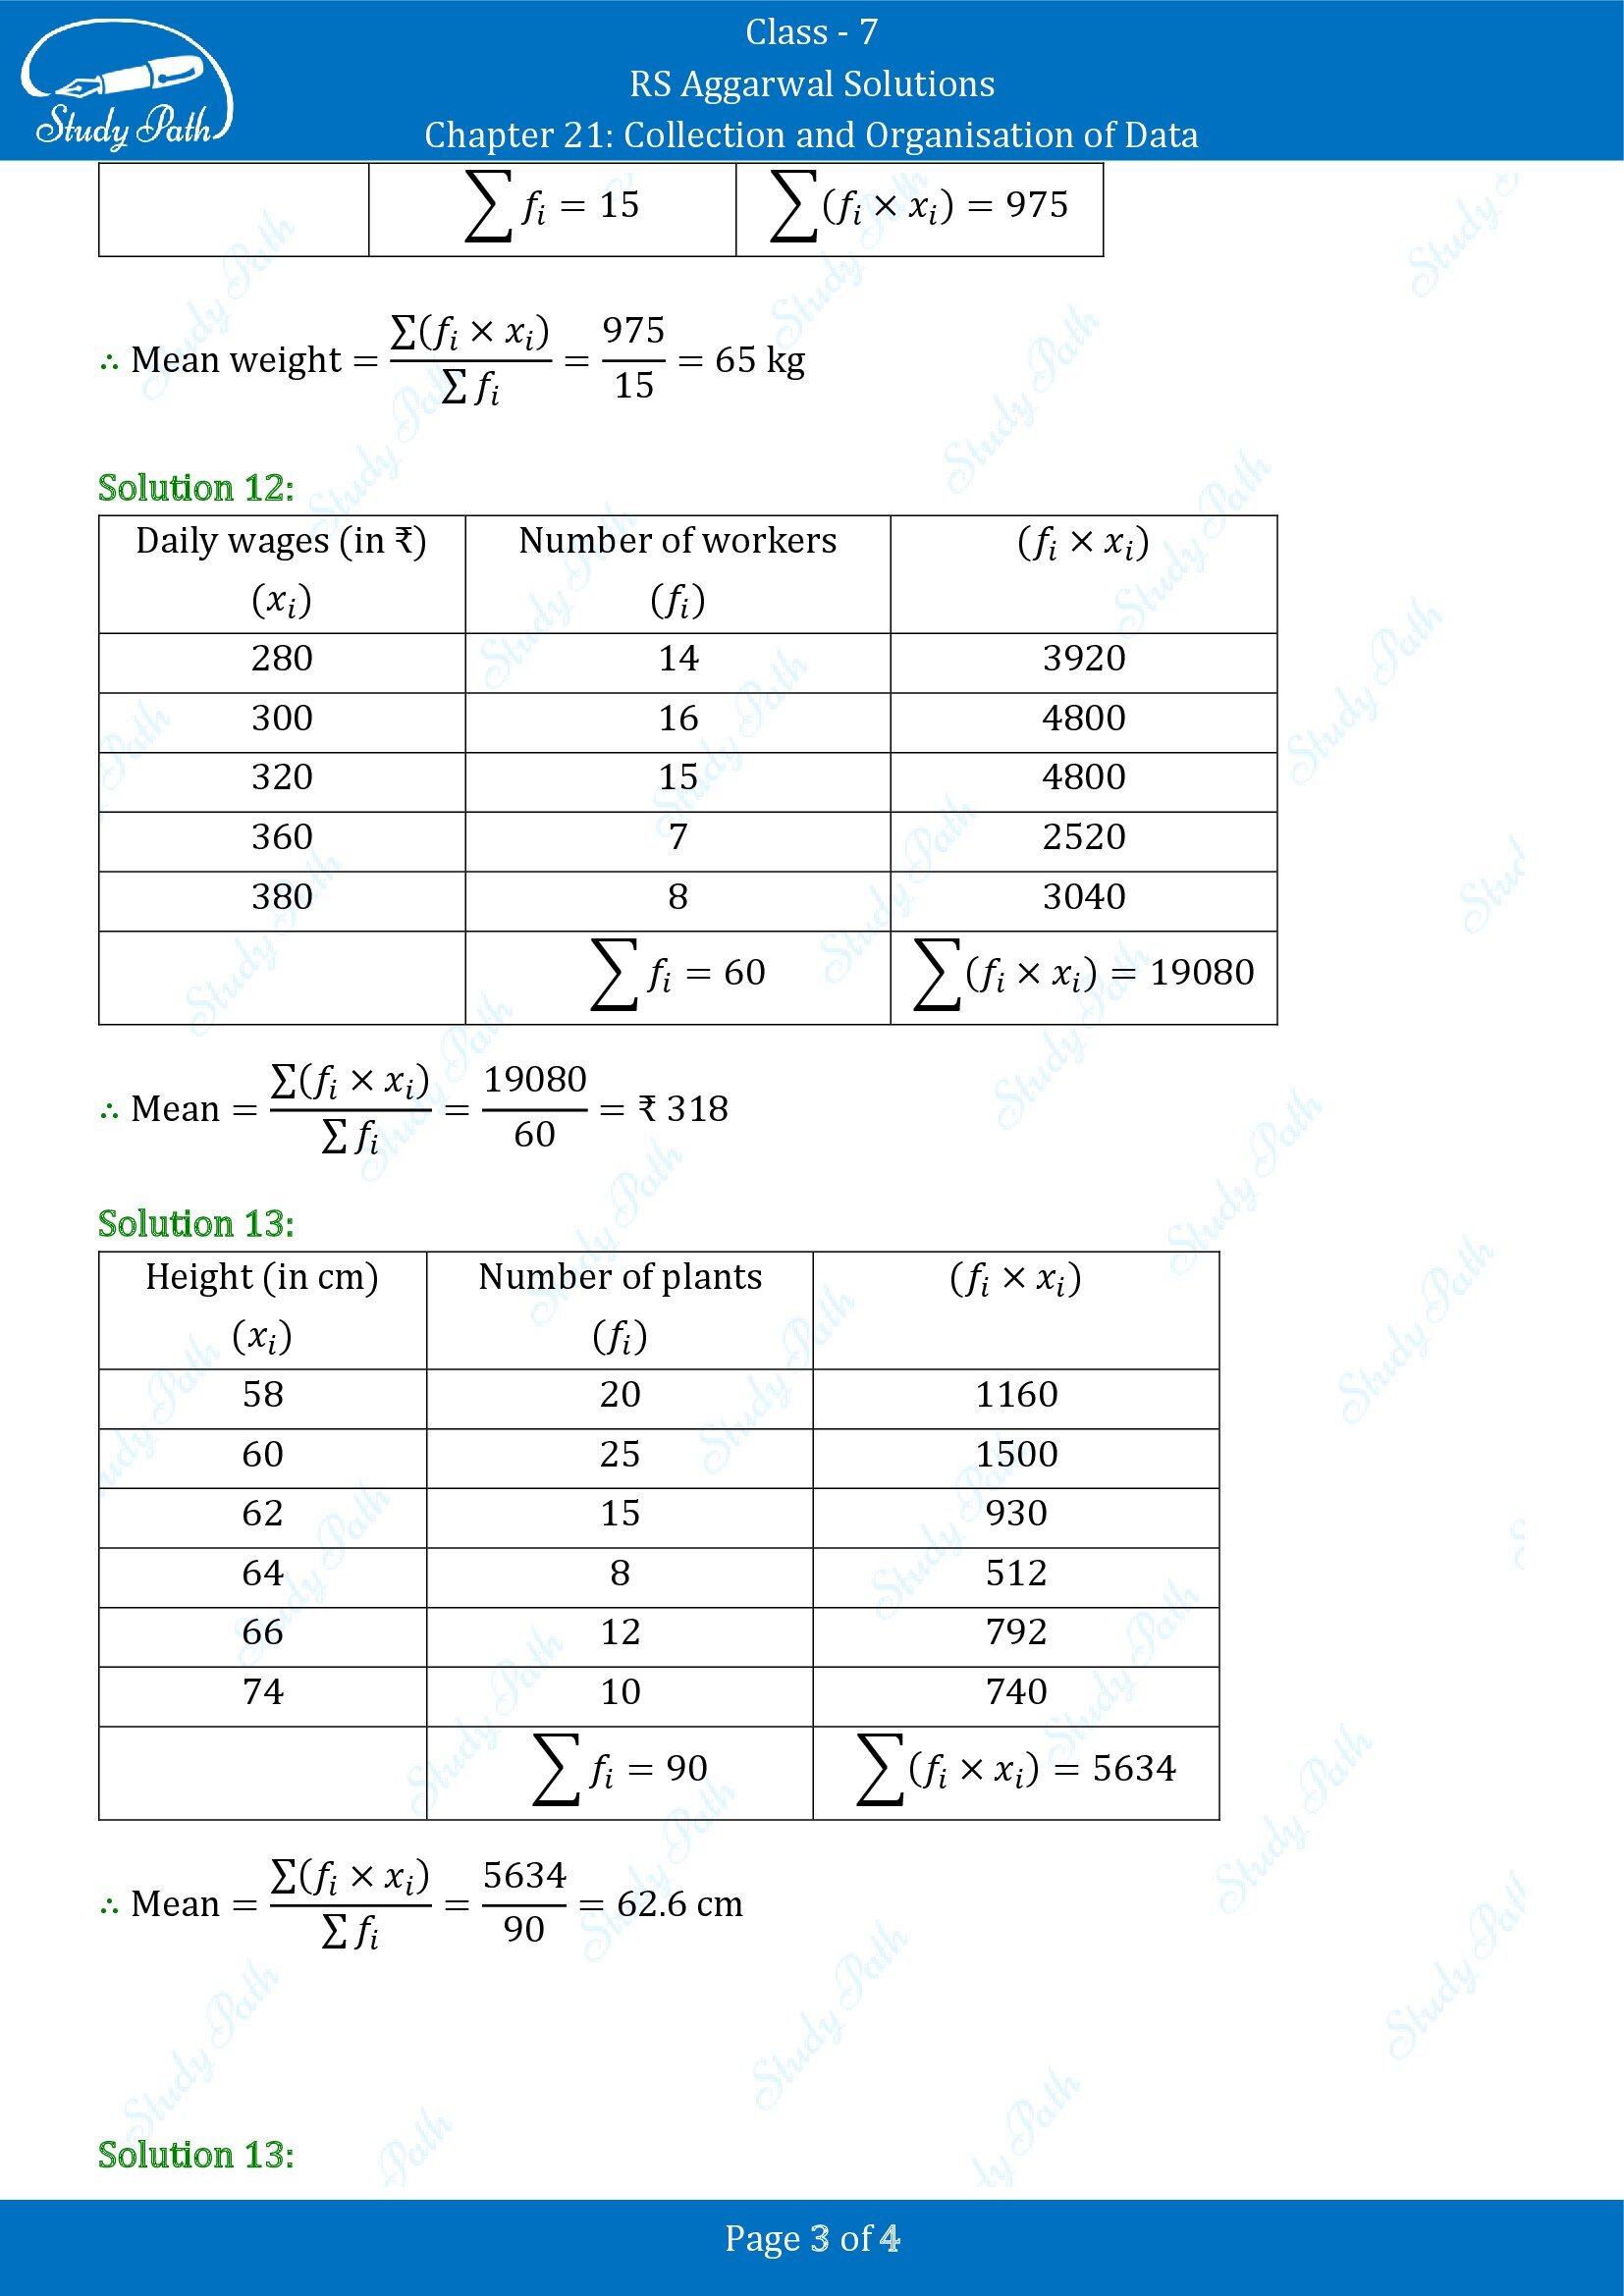 RS Aggarwal Solutions Class 7 Chapter 21 Collection and Organisation of Data Exercise 21A 0003